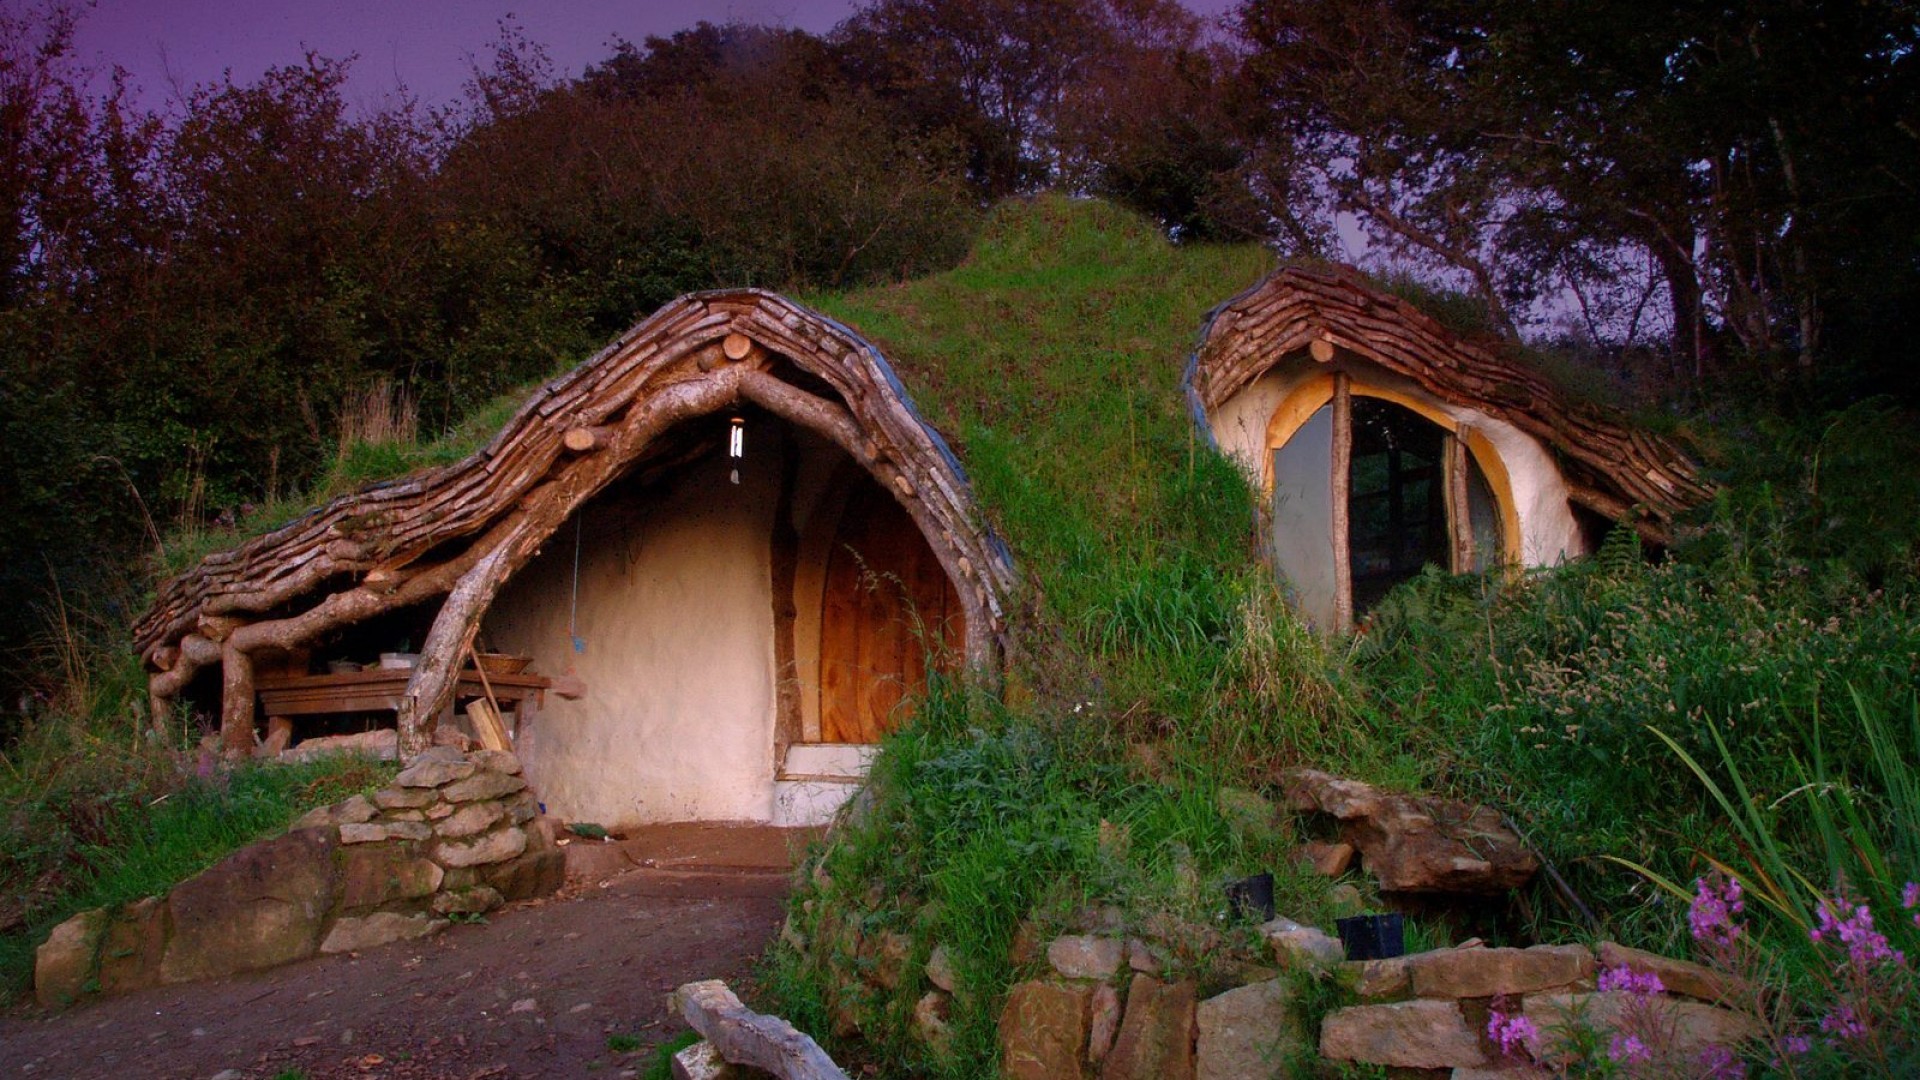 1920x1080 The Lord Of The Rings, The Shire  (1080p) - Wallpaper .